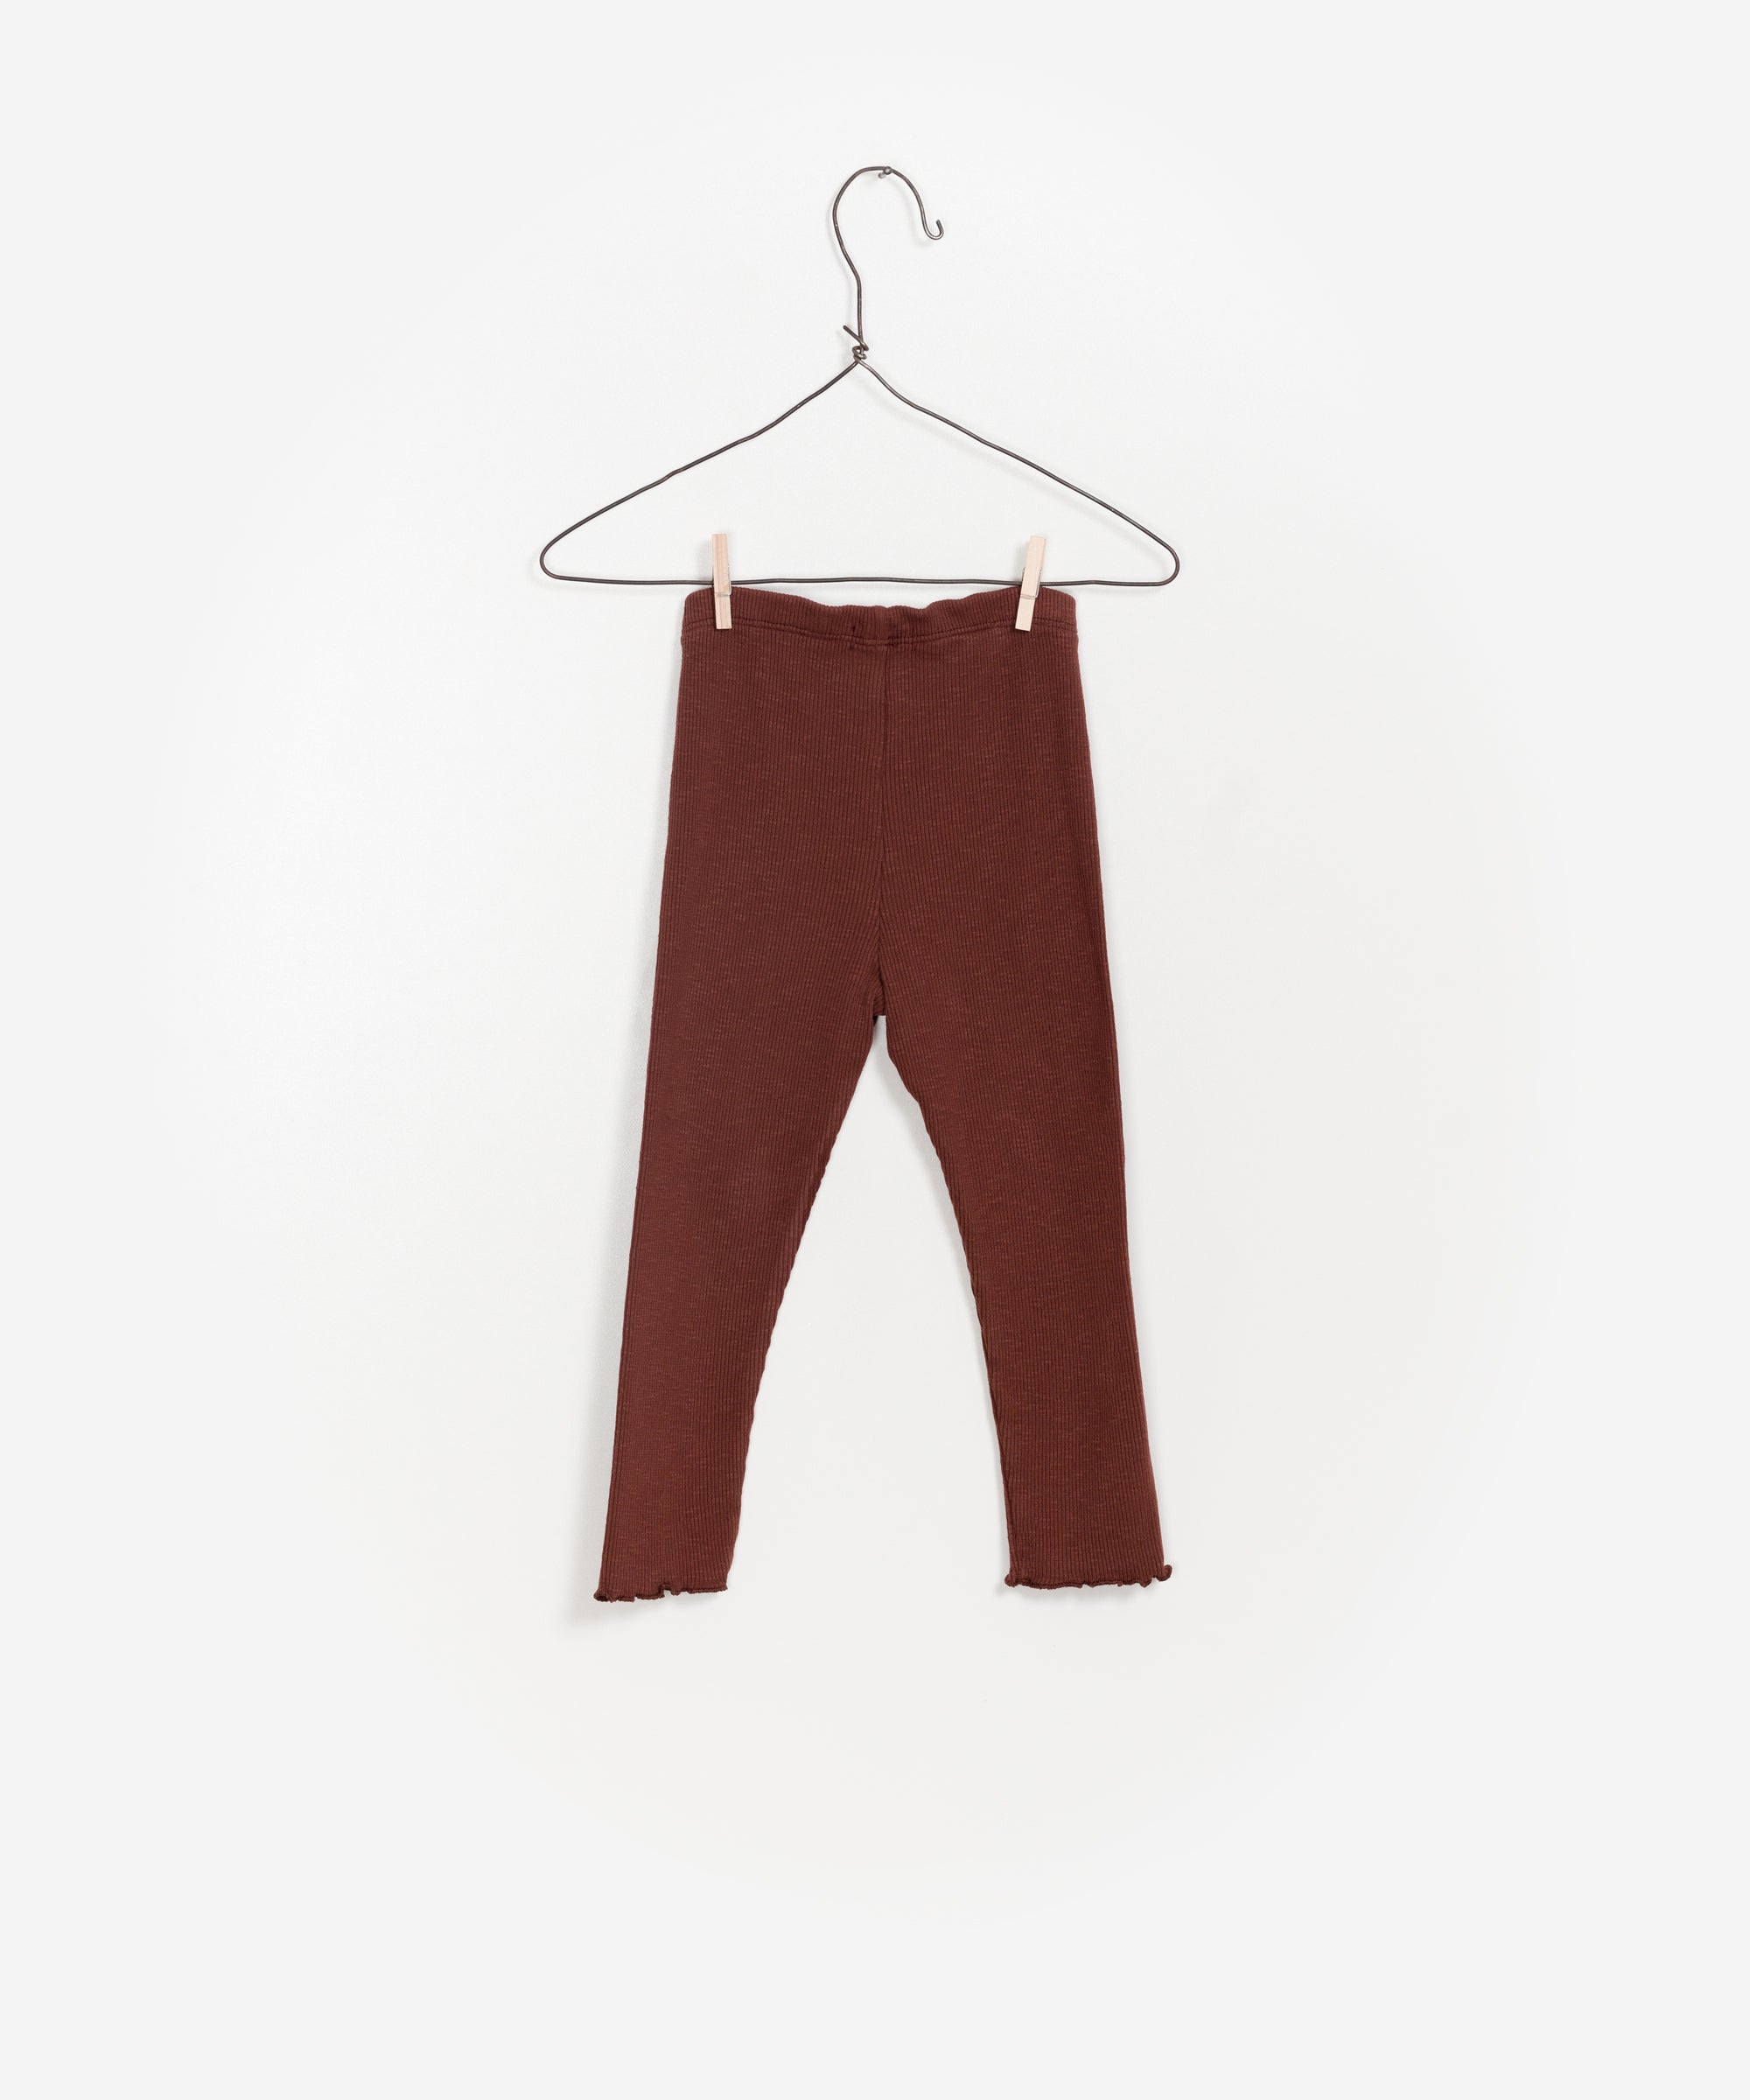 Girls Brick Red Cotton Trousers